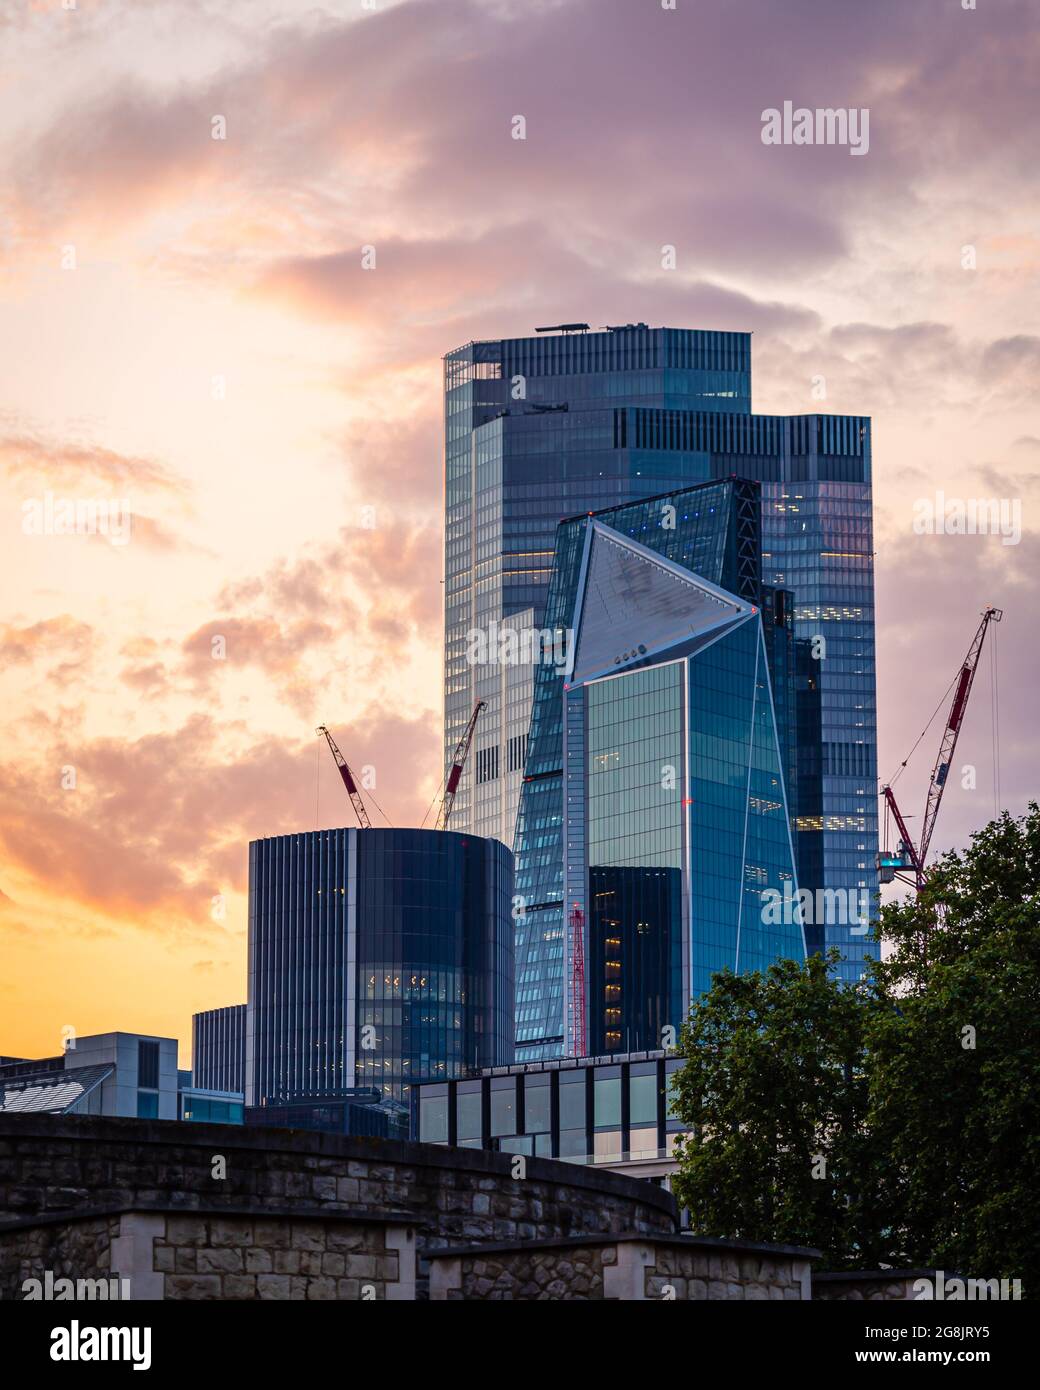 Looking across towards the financial district, London, UK Stock Photo